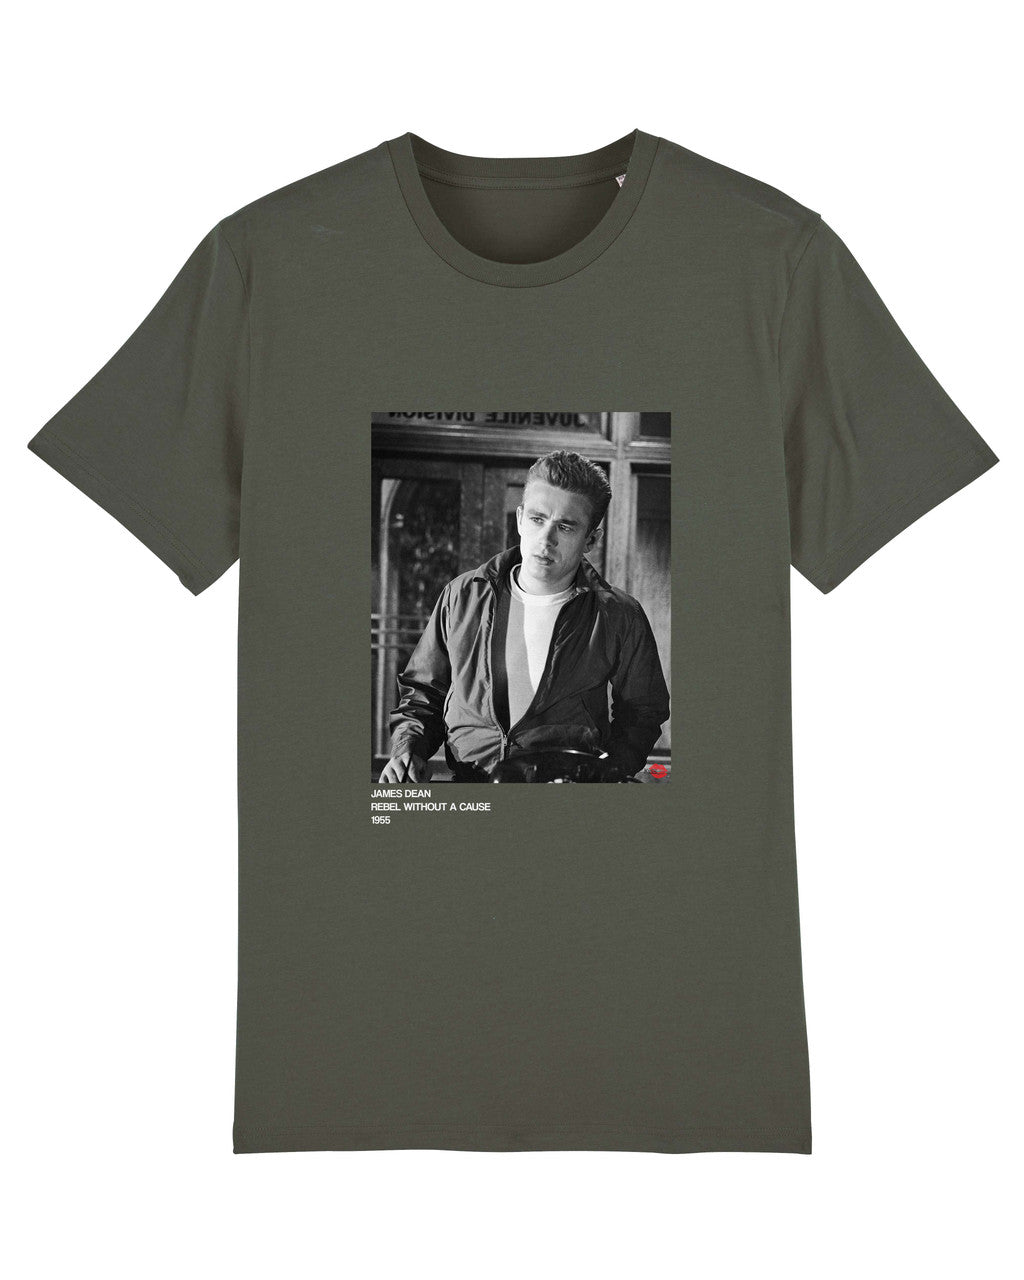 James Dean 1955 KiSS T-Shirt - Rebel Without a Cause - 50s movie - Classic - Icon